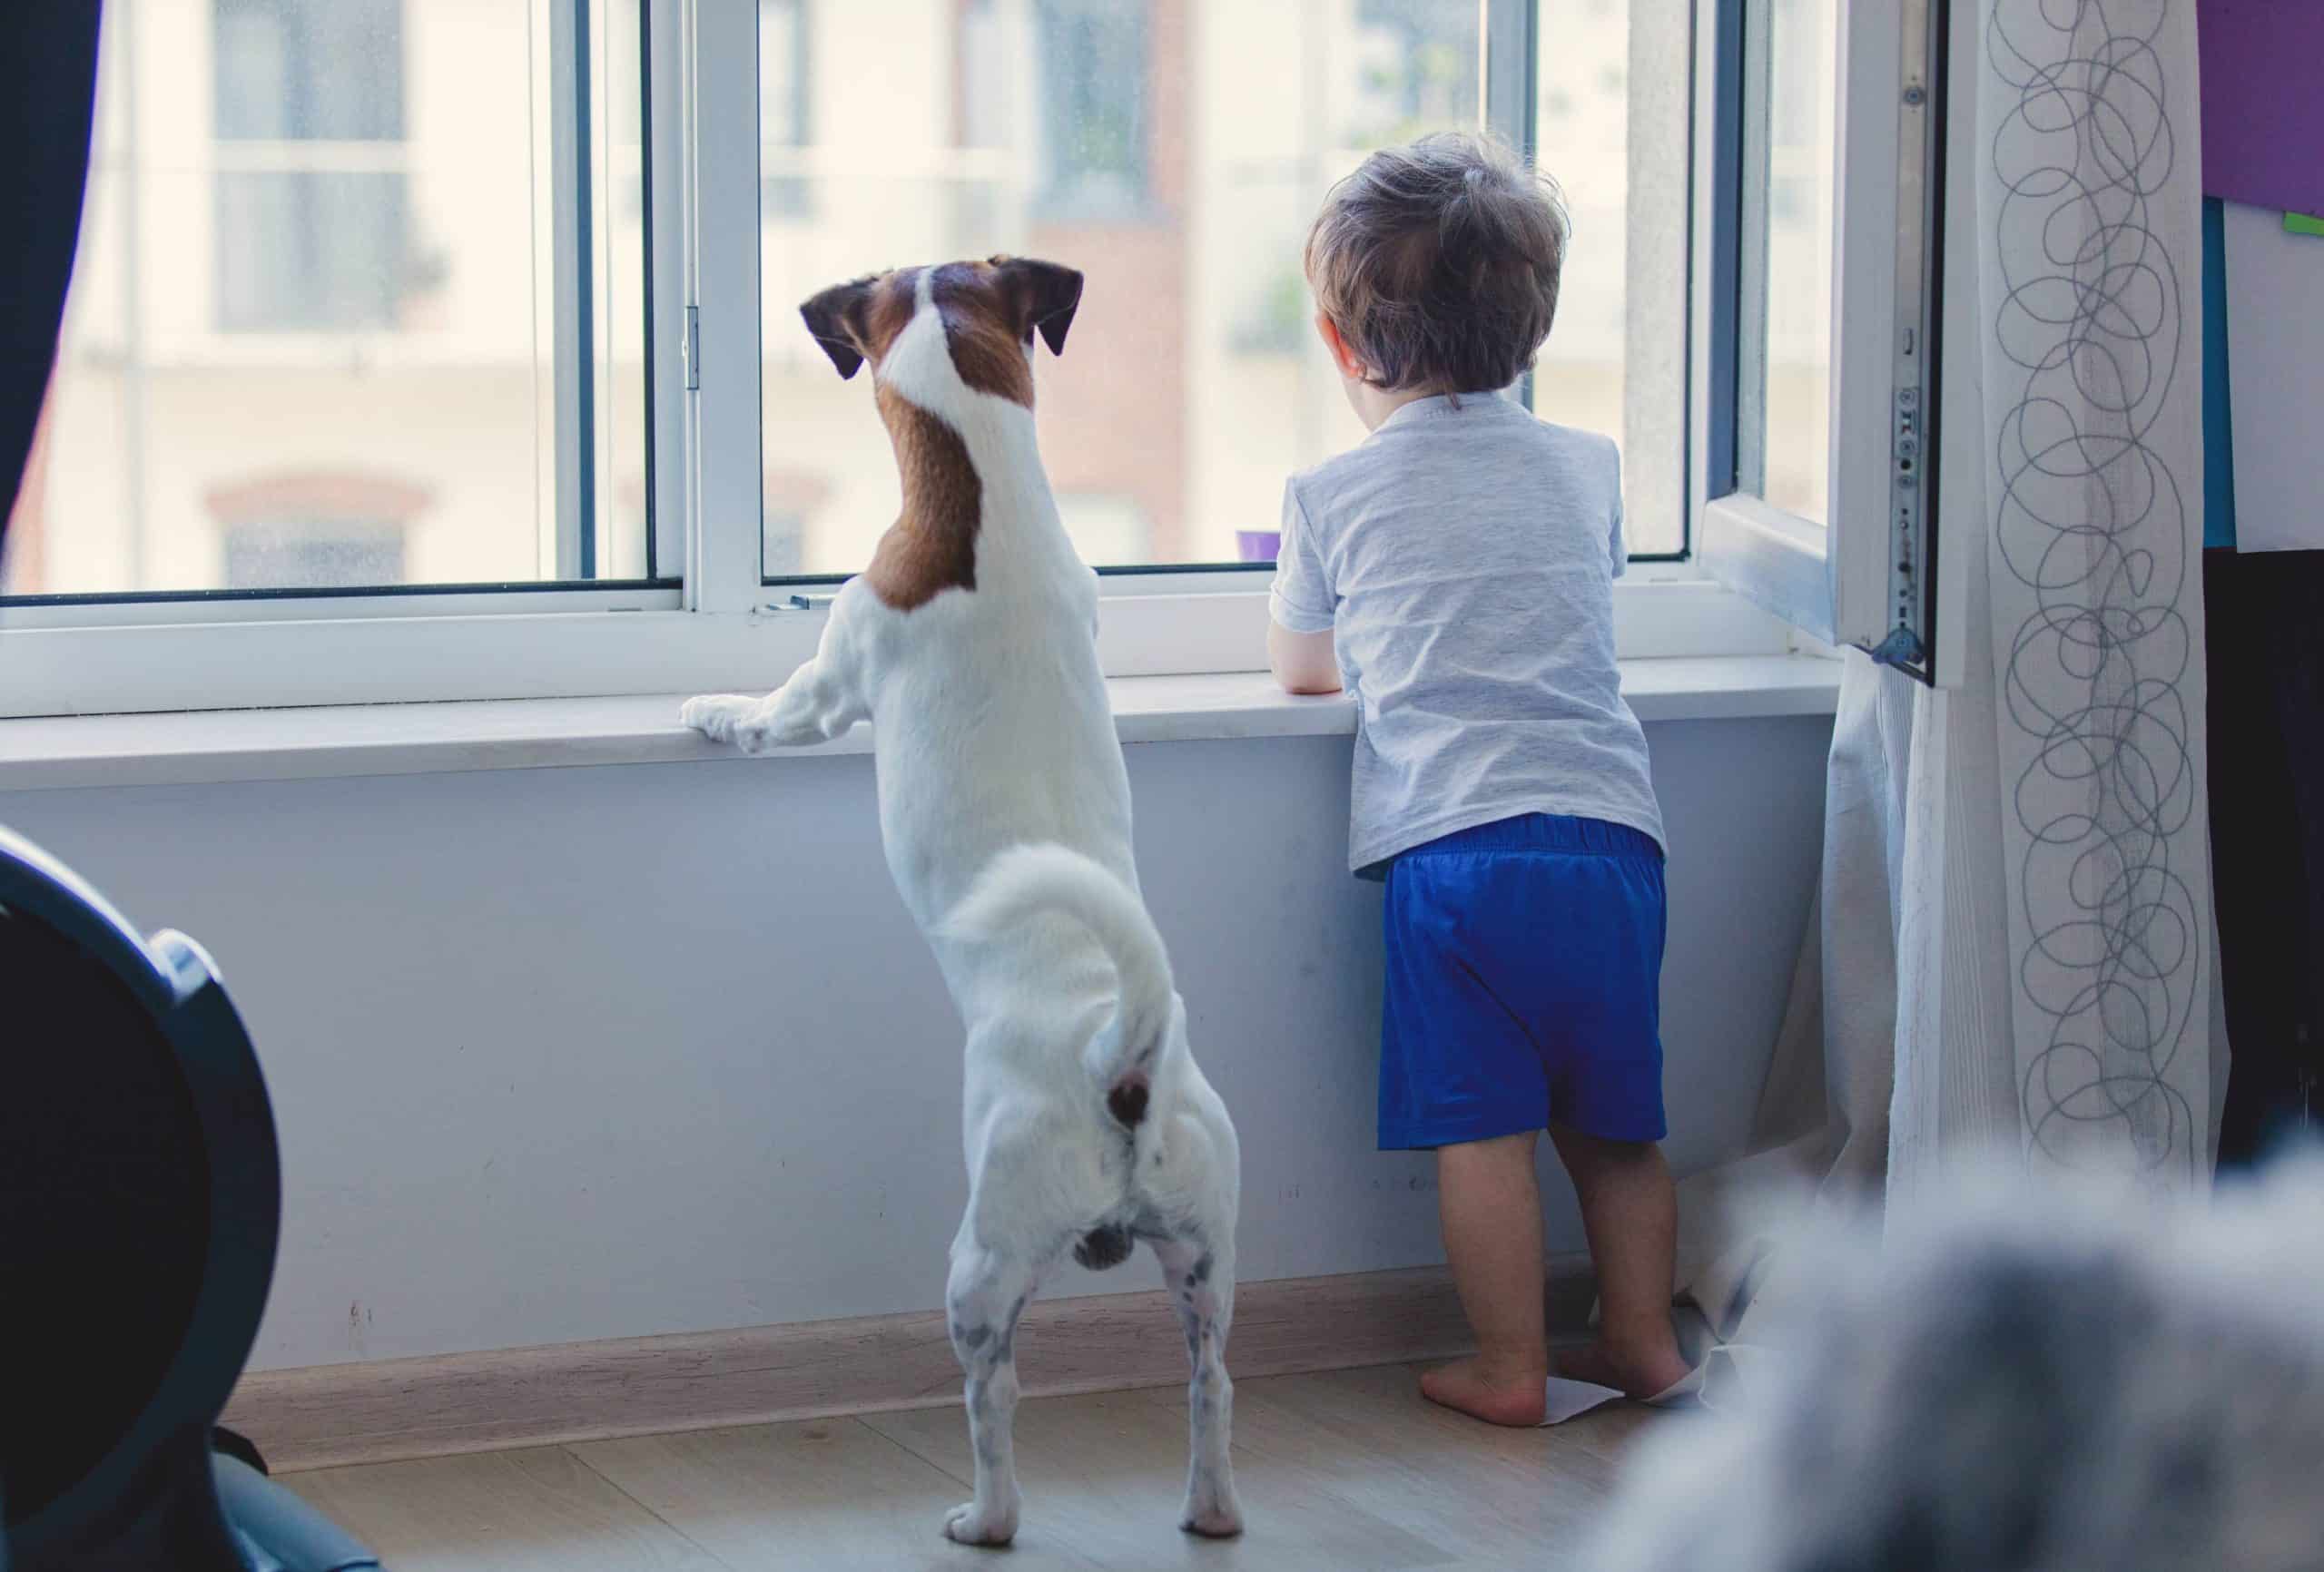 Young boy looking out the window alongside his dog, with paws and hands on the window sill